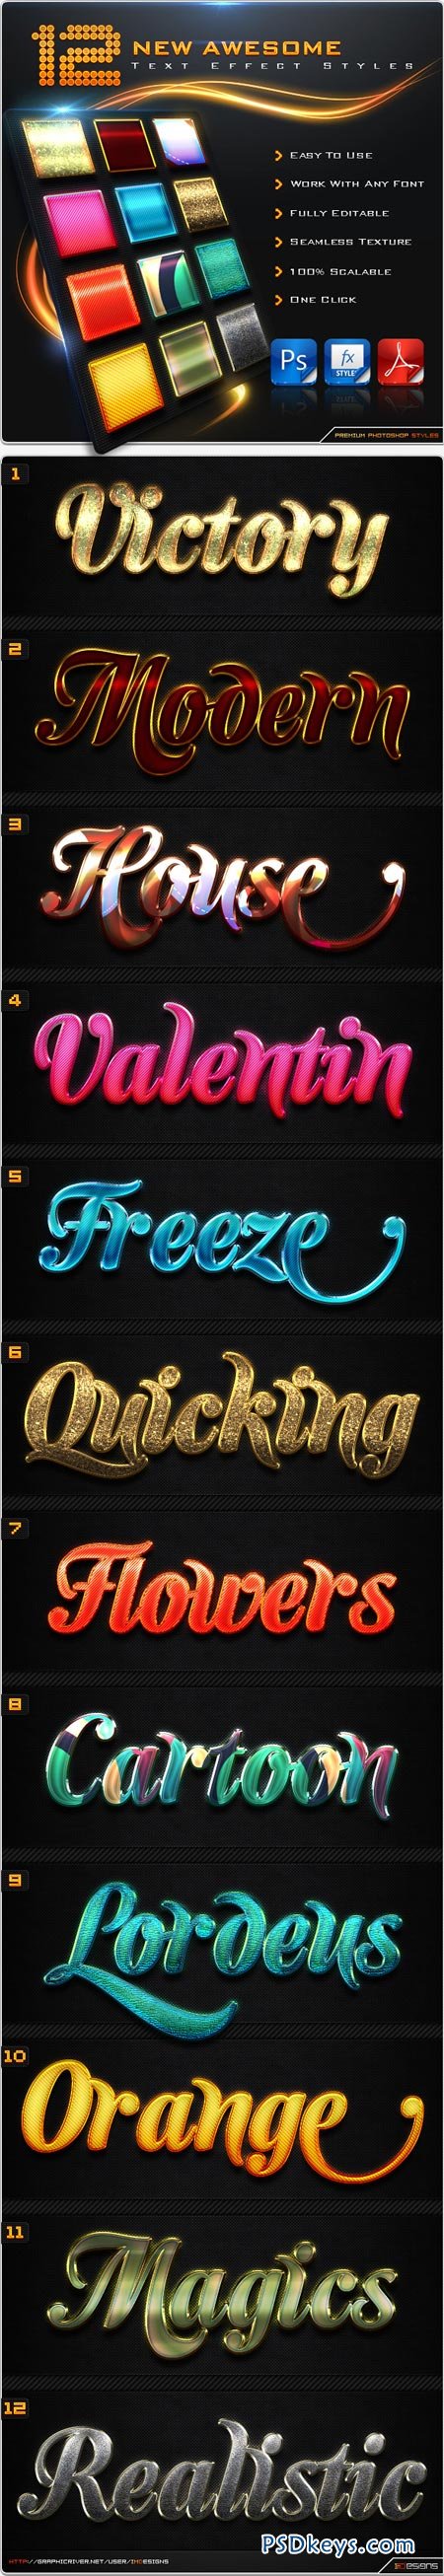 12 New Awesome Text Effect Styles 8536493